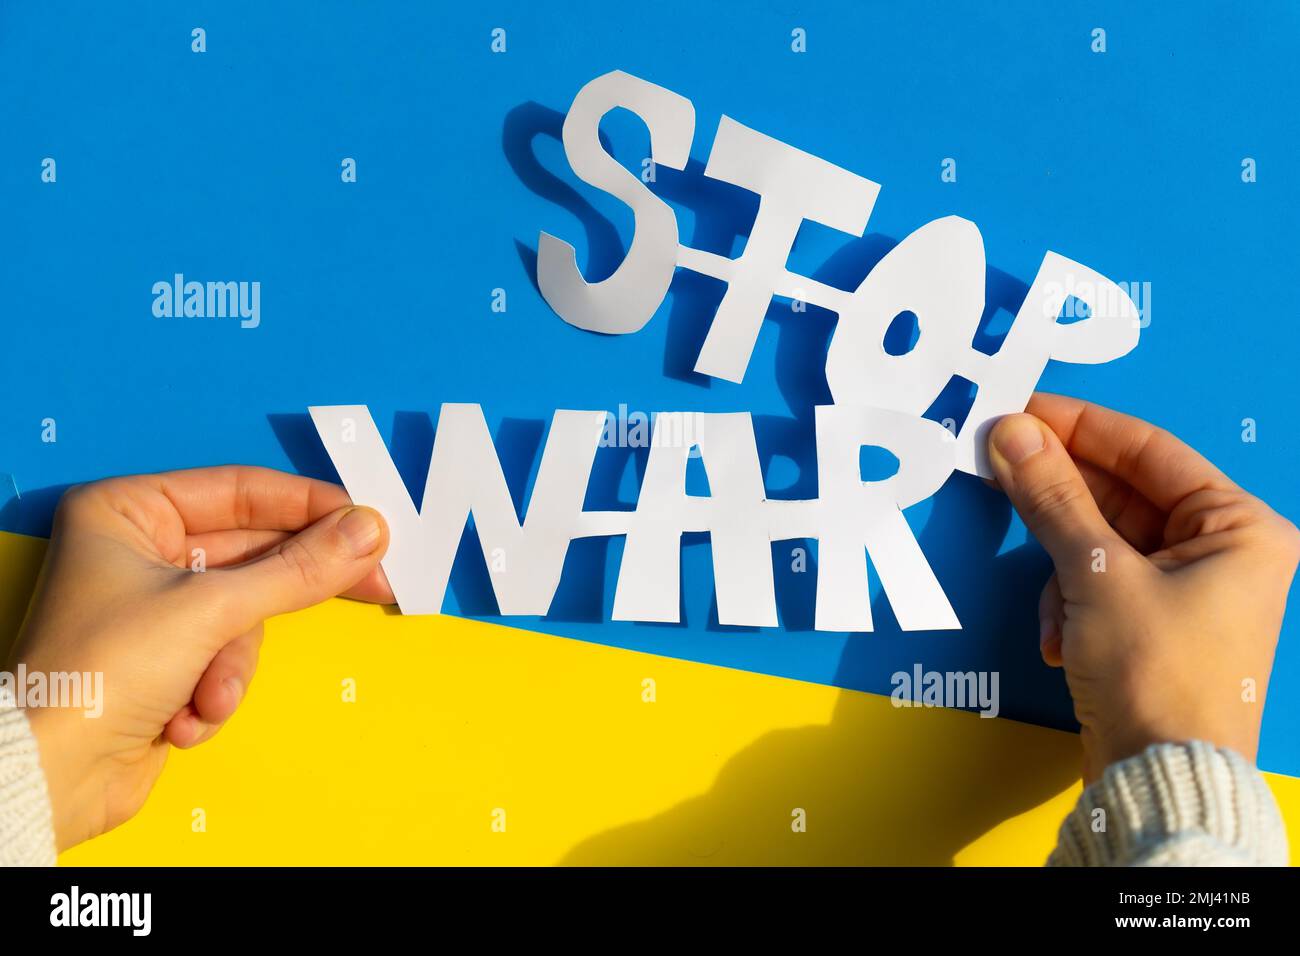 Stop war, conflict between Ukraine and Russia. Hands of a woman holding an anti war symbol Stock Photo